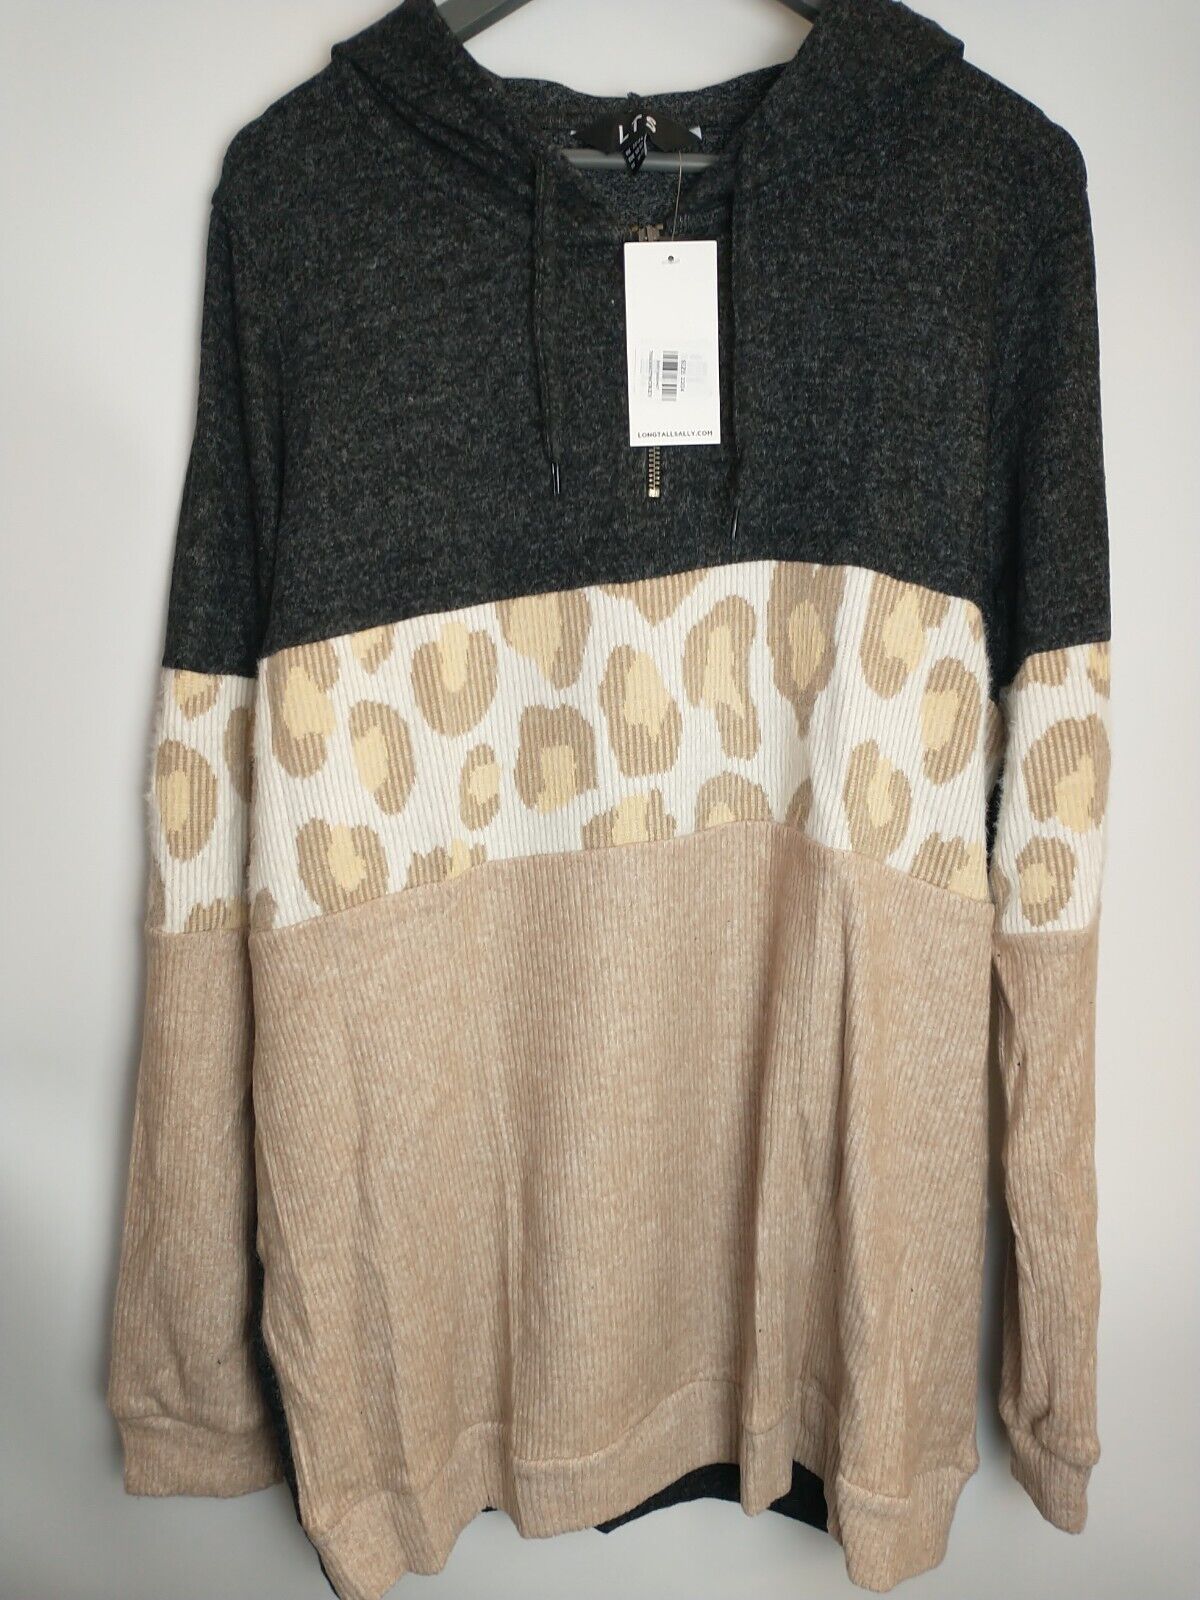 Long Tall Sally Grey & Cream Colourblock Knitted Hoodie Size 22/24 **** V209